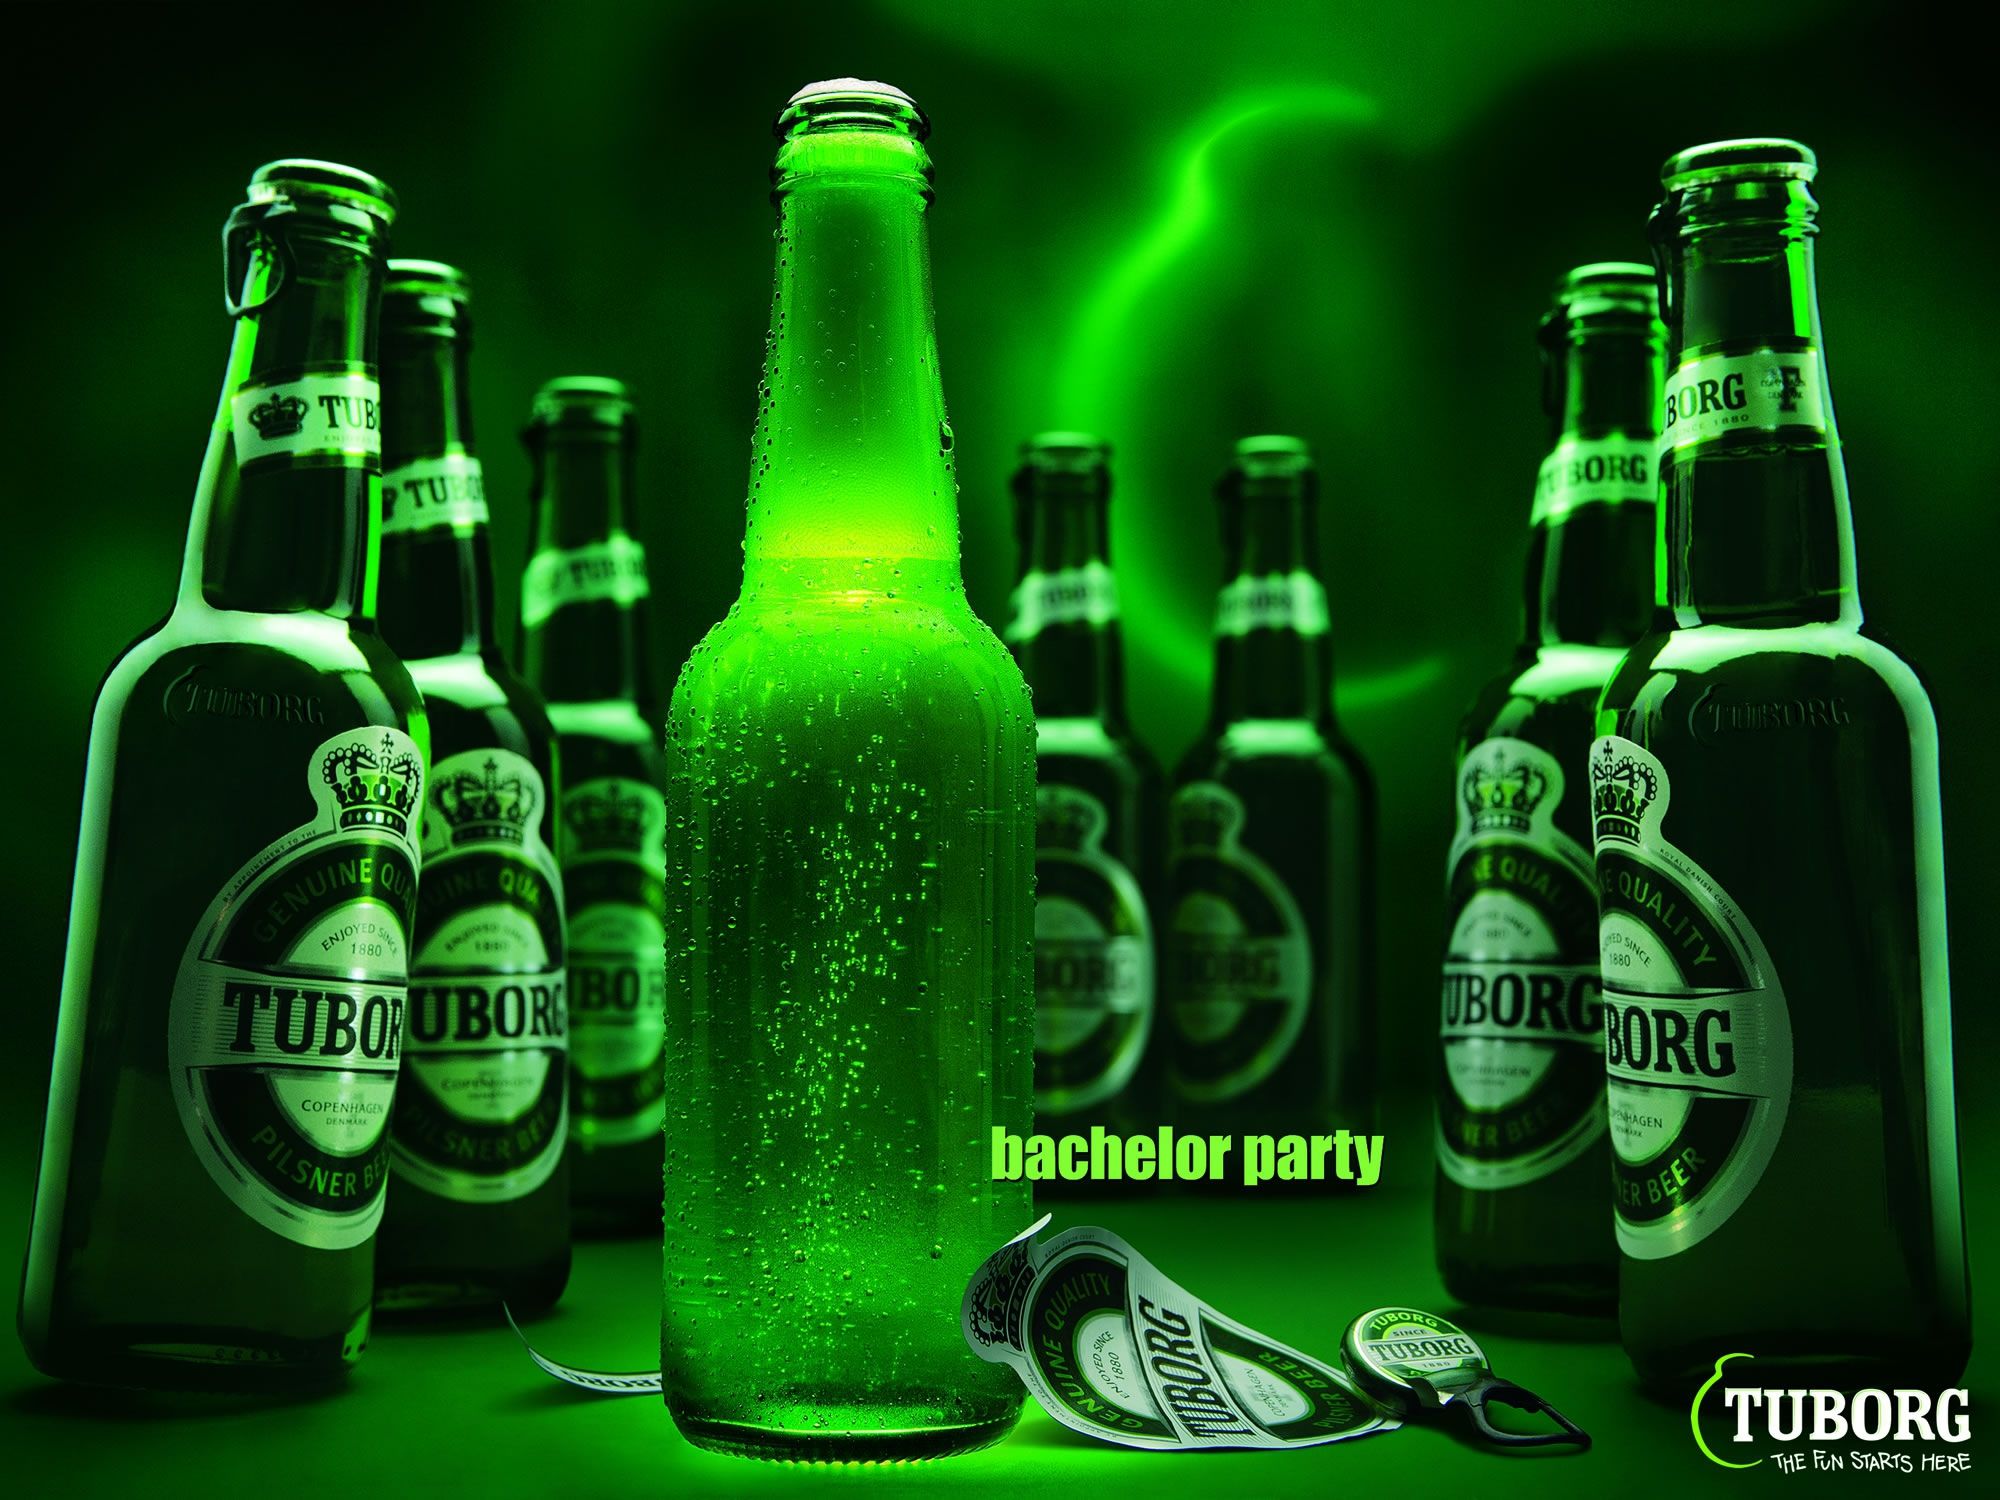 Tuborg Wallpaper Image Photo Picture Background